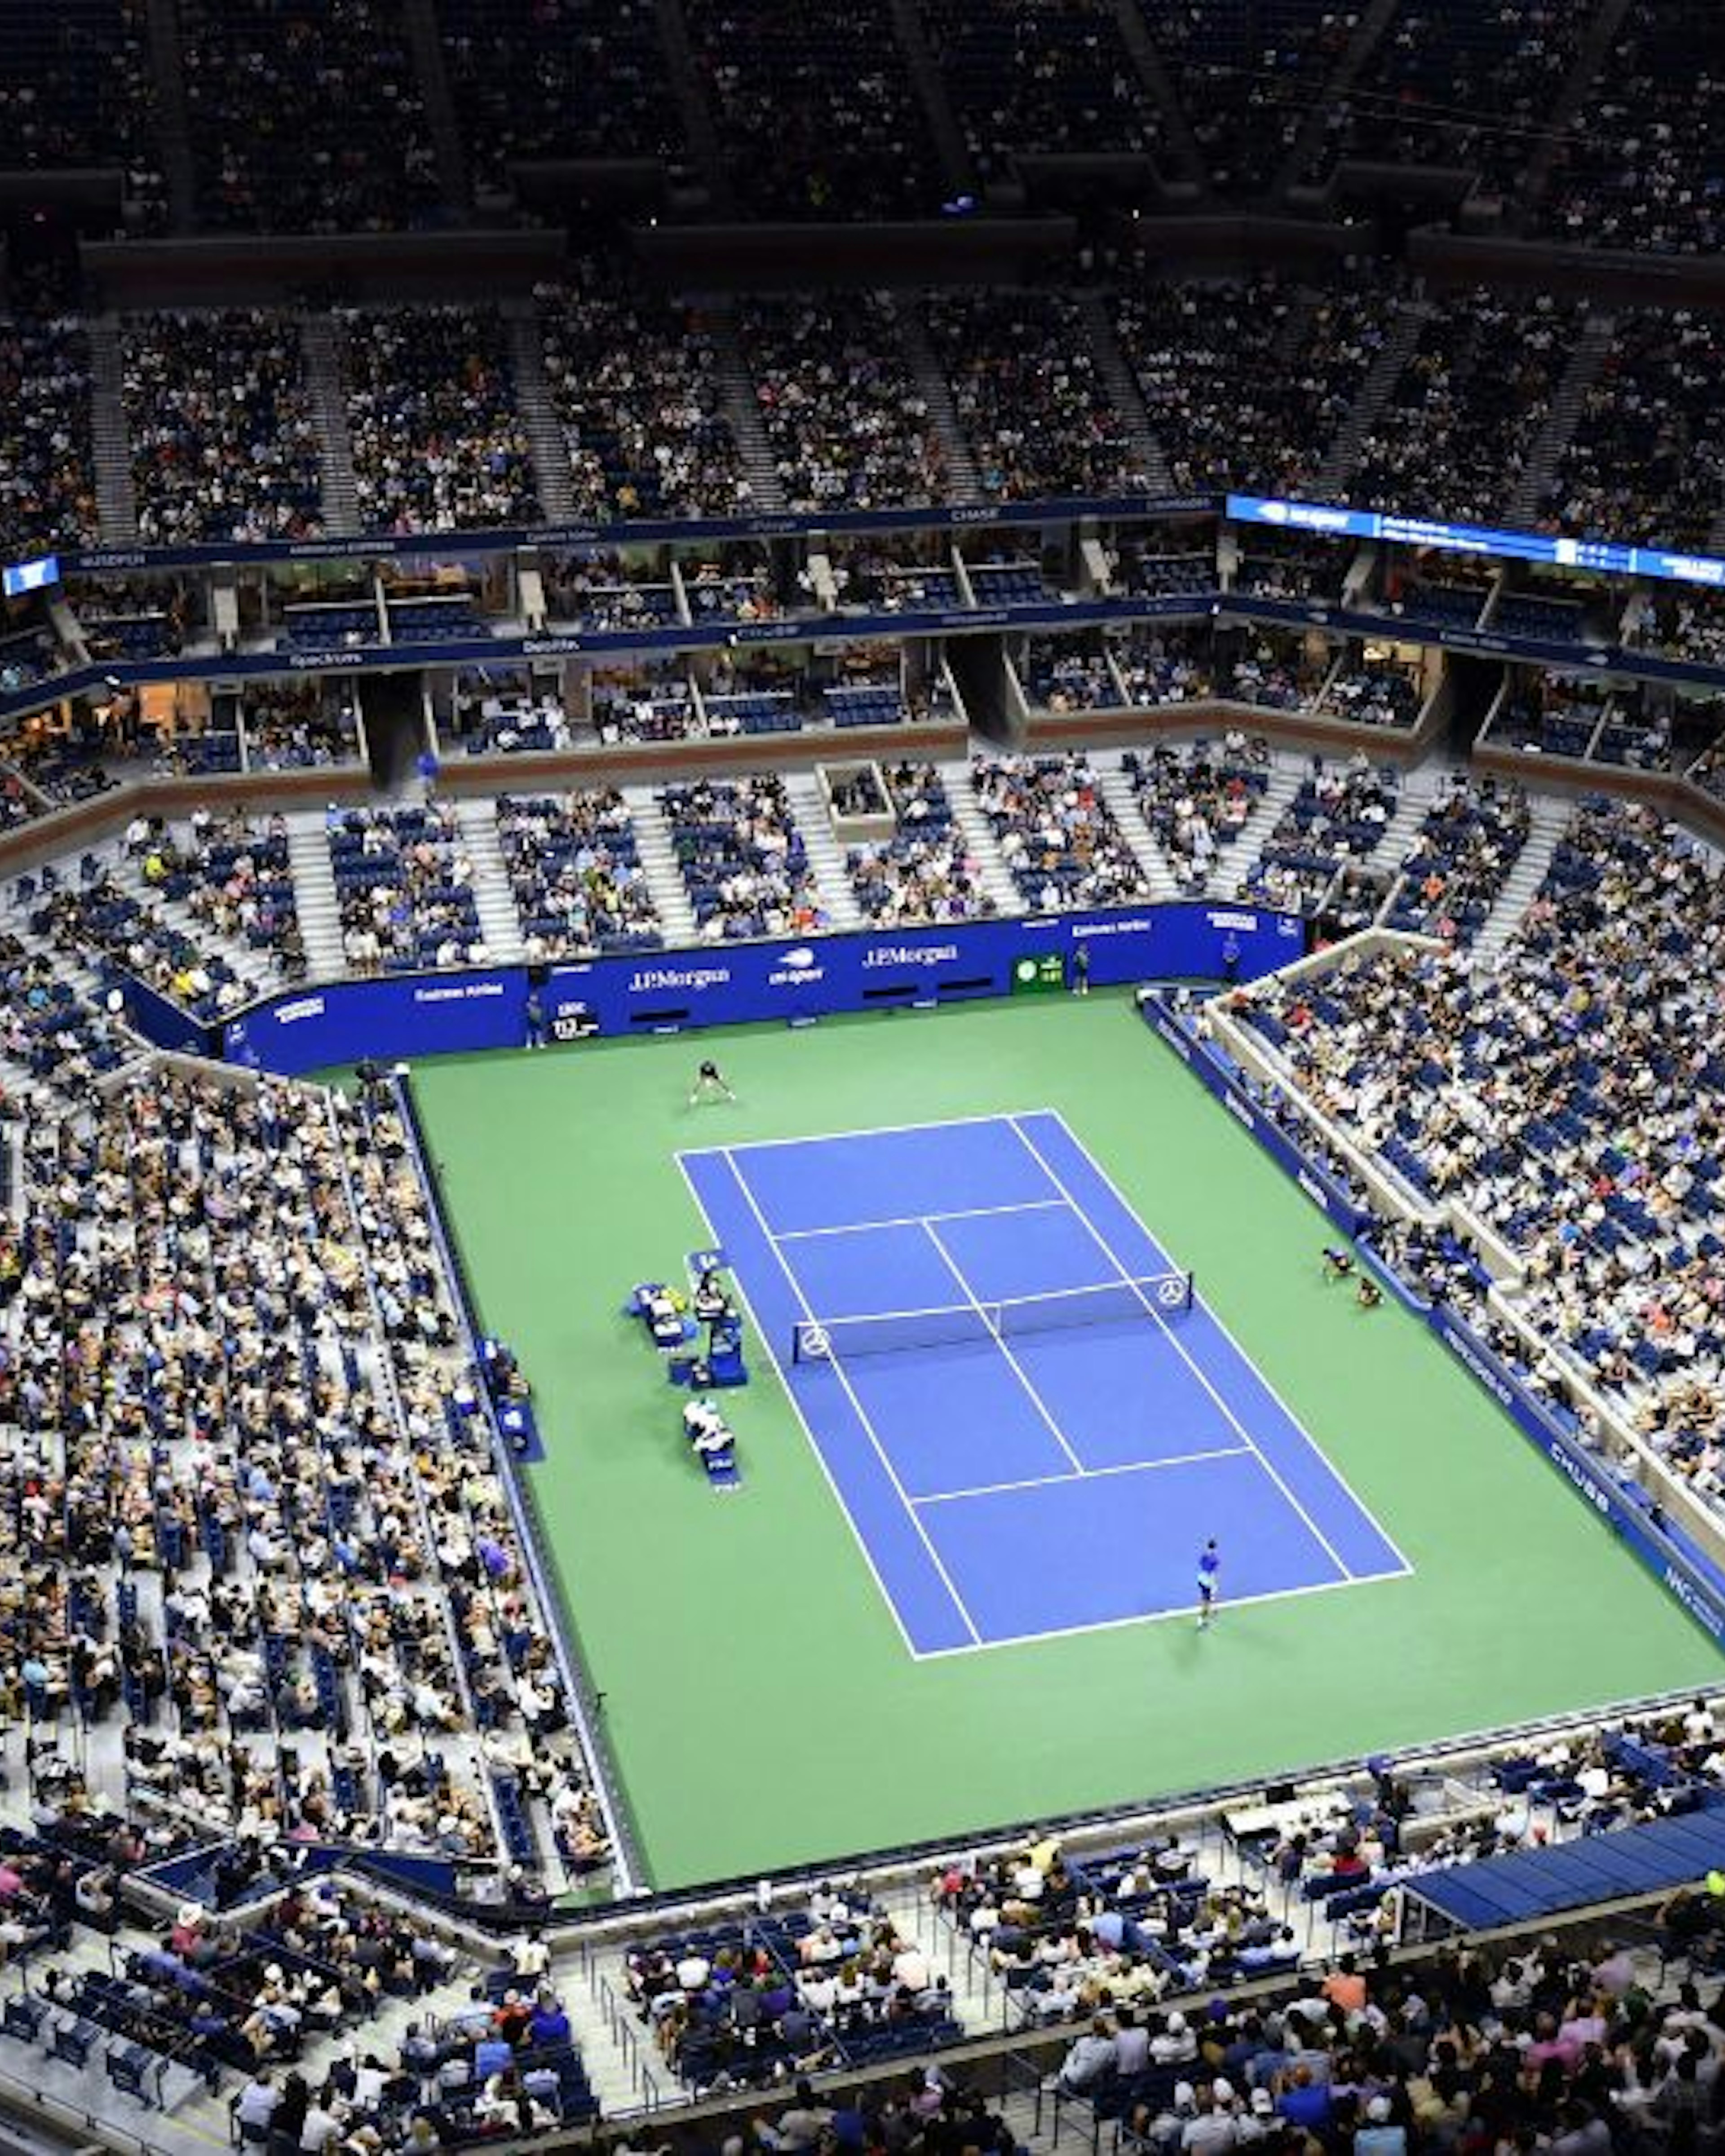 An overview shows Arthur Ashe Stadium during the 2021 US Open Tennis tournament men's singles first round match between Serbia's Novak Djokovic (bottom) and Denmark's Holger Rune at the USTA Billie Jean King National Tennis Center in New York, on August 31, 2021.